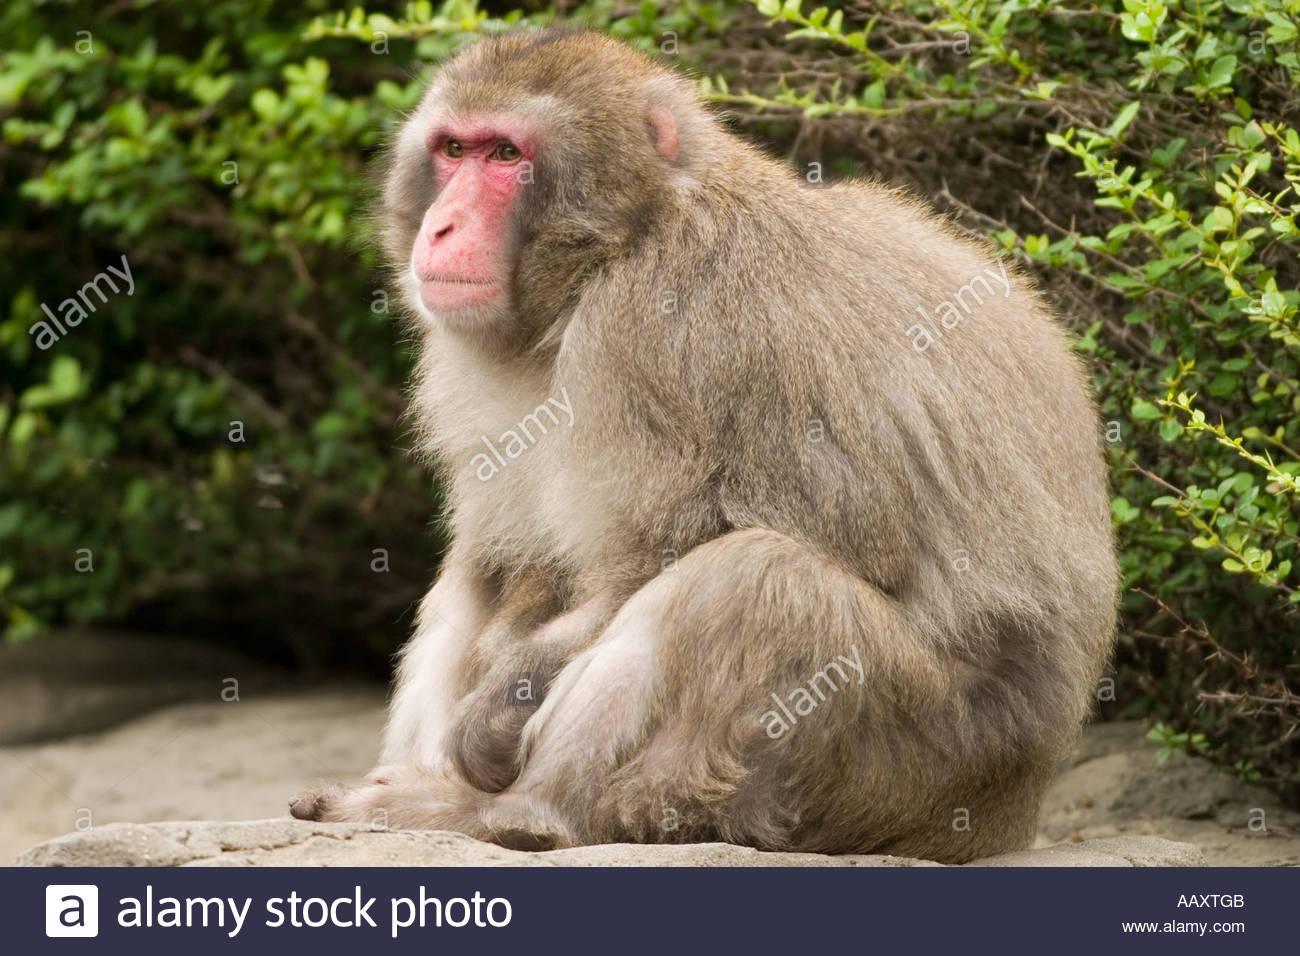 HQ Japanese Macaque Wallpapers | File 191.59Kb